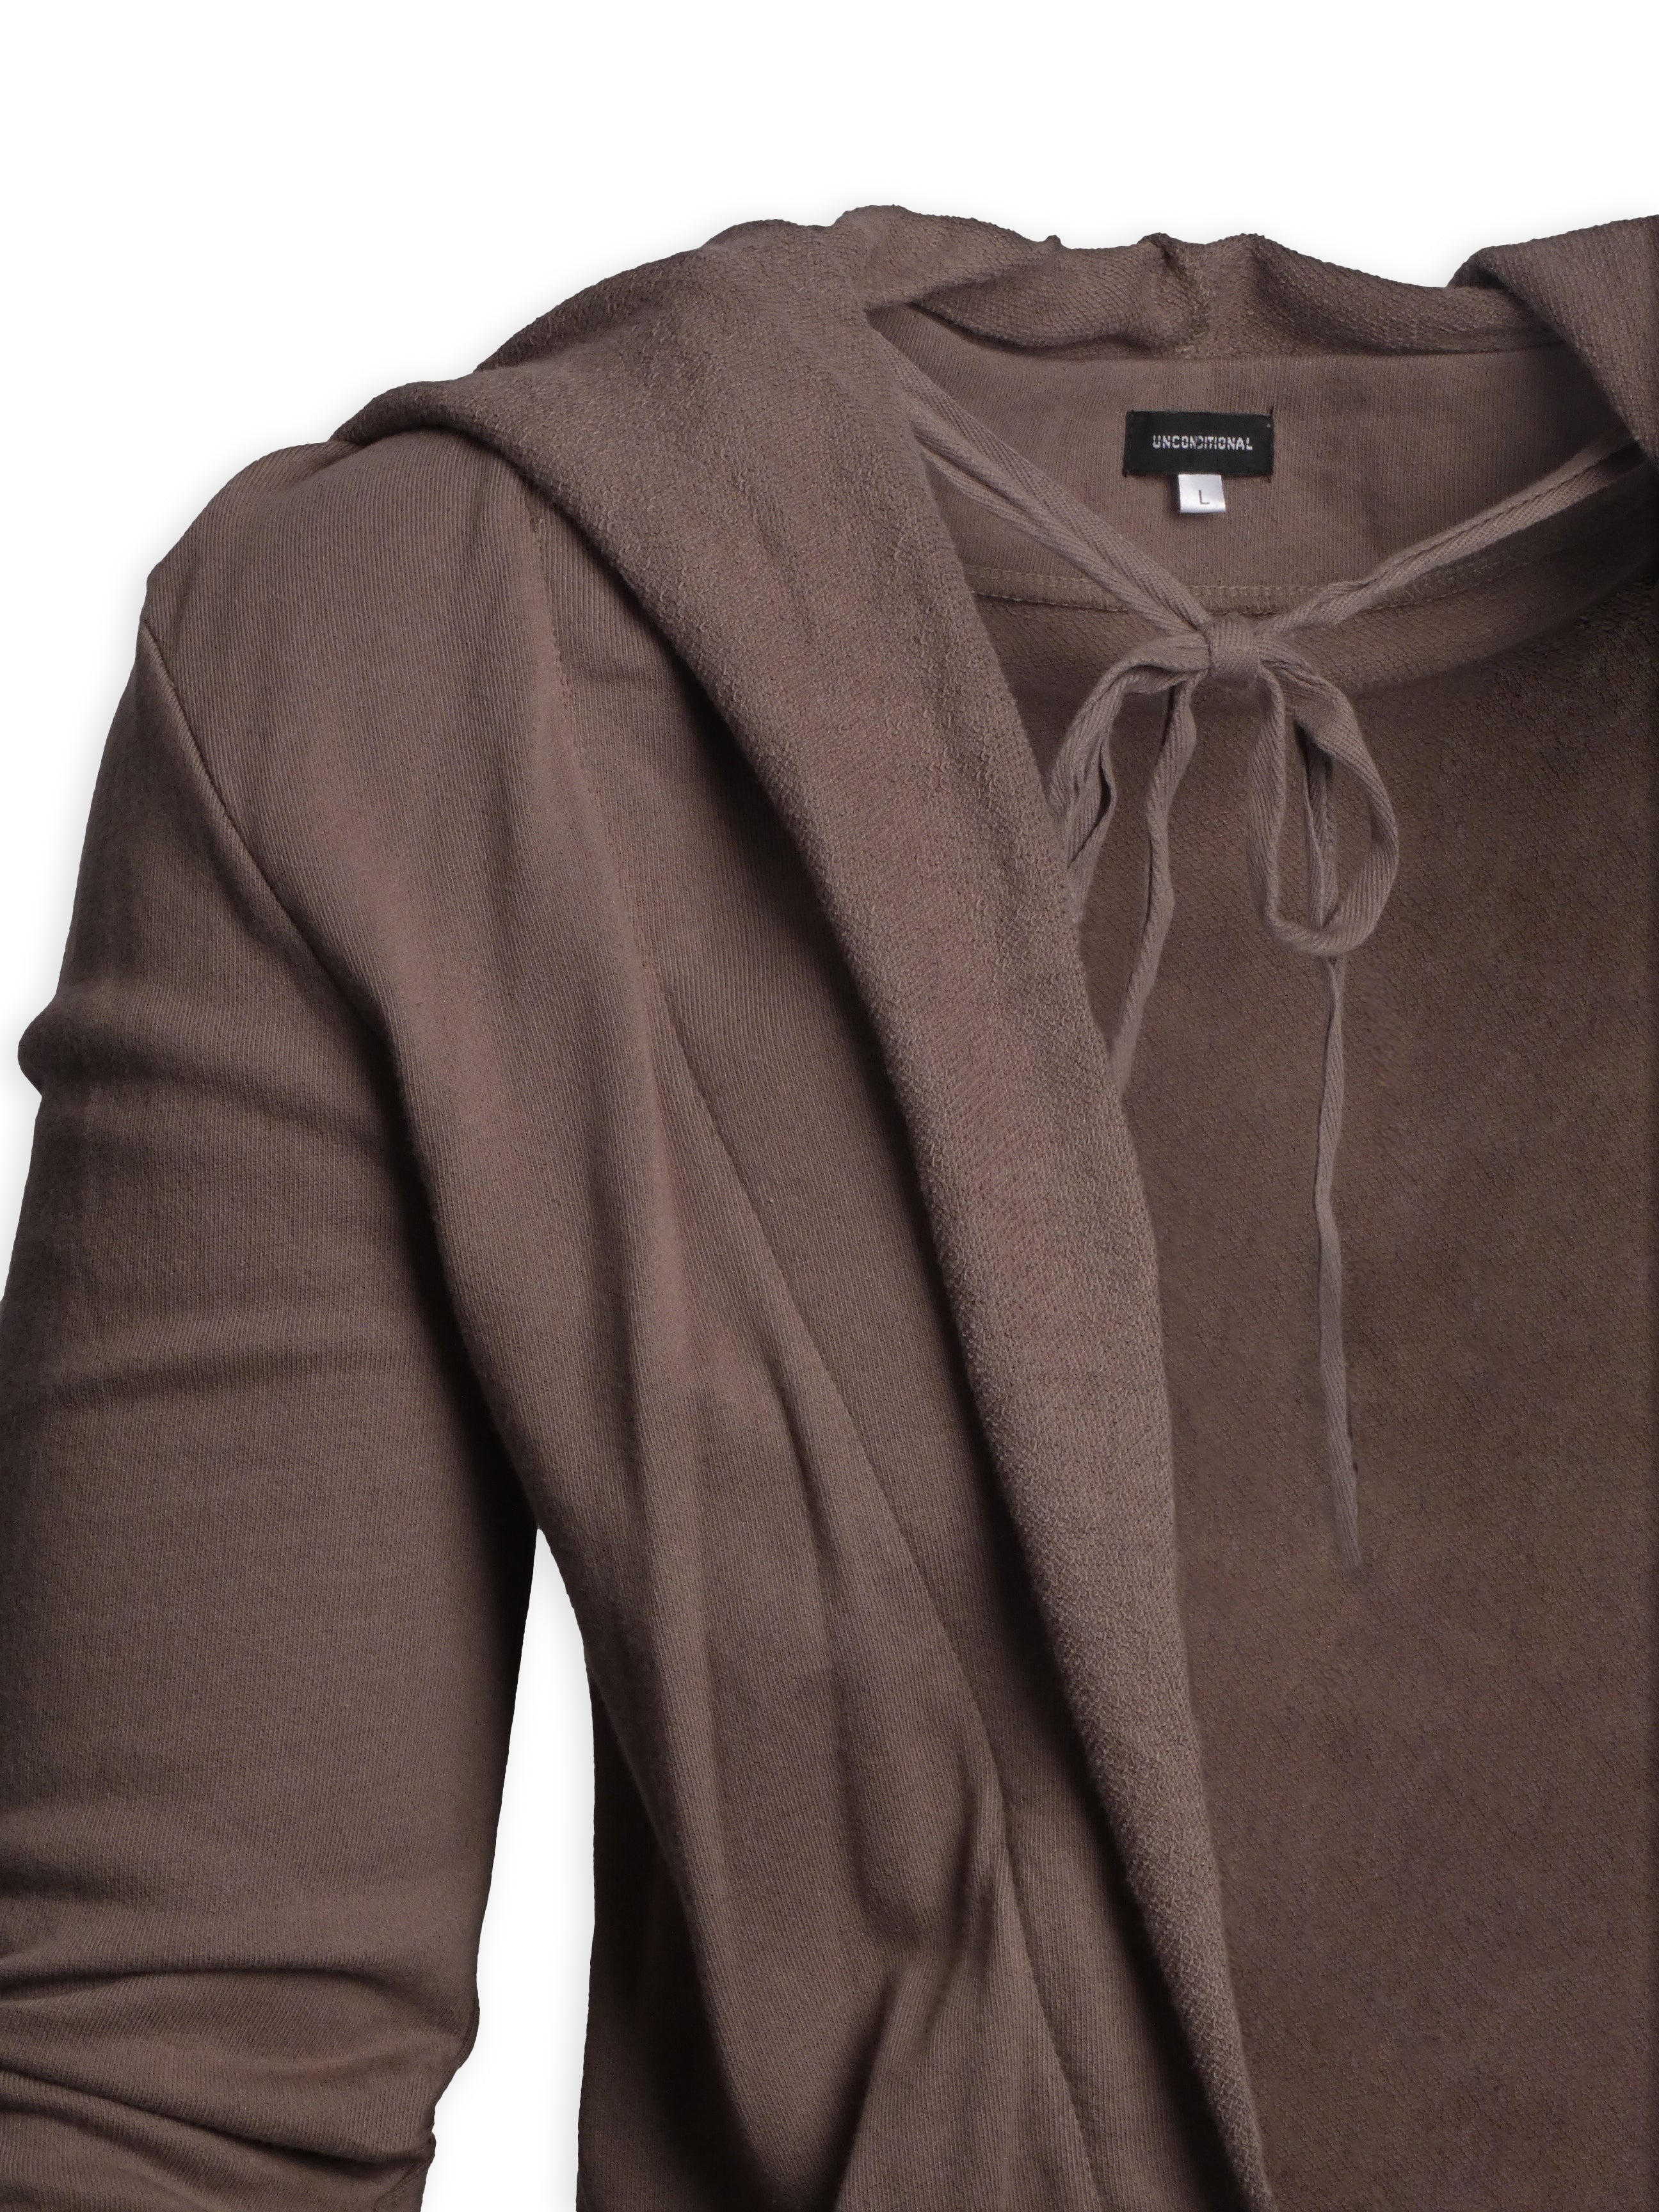 Brown Open V Cut Two Button Hooded Cardigan